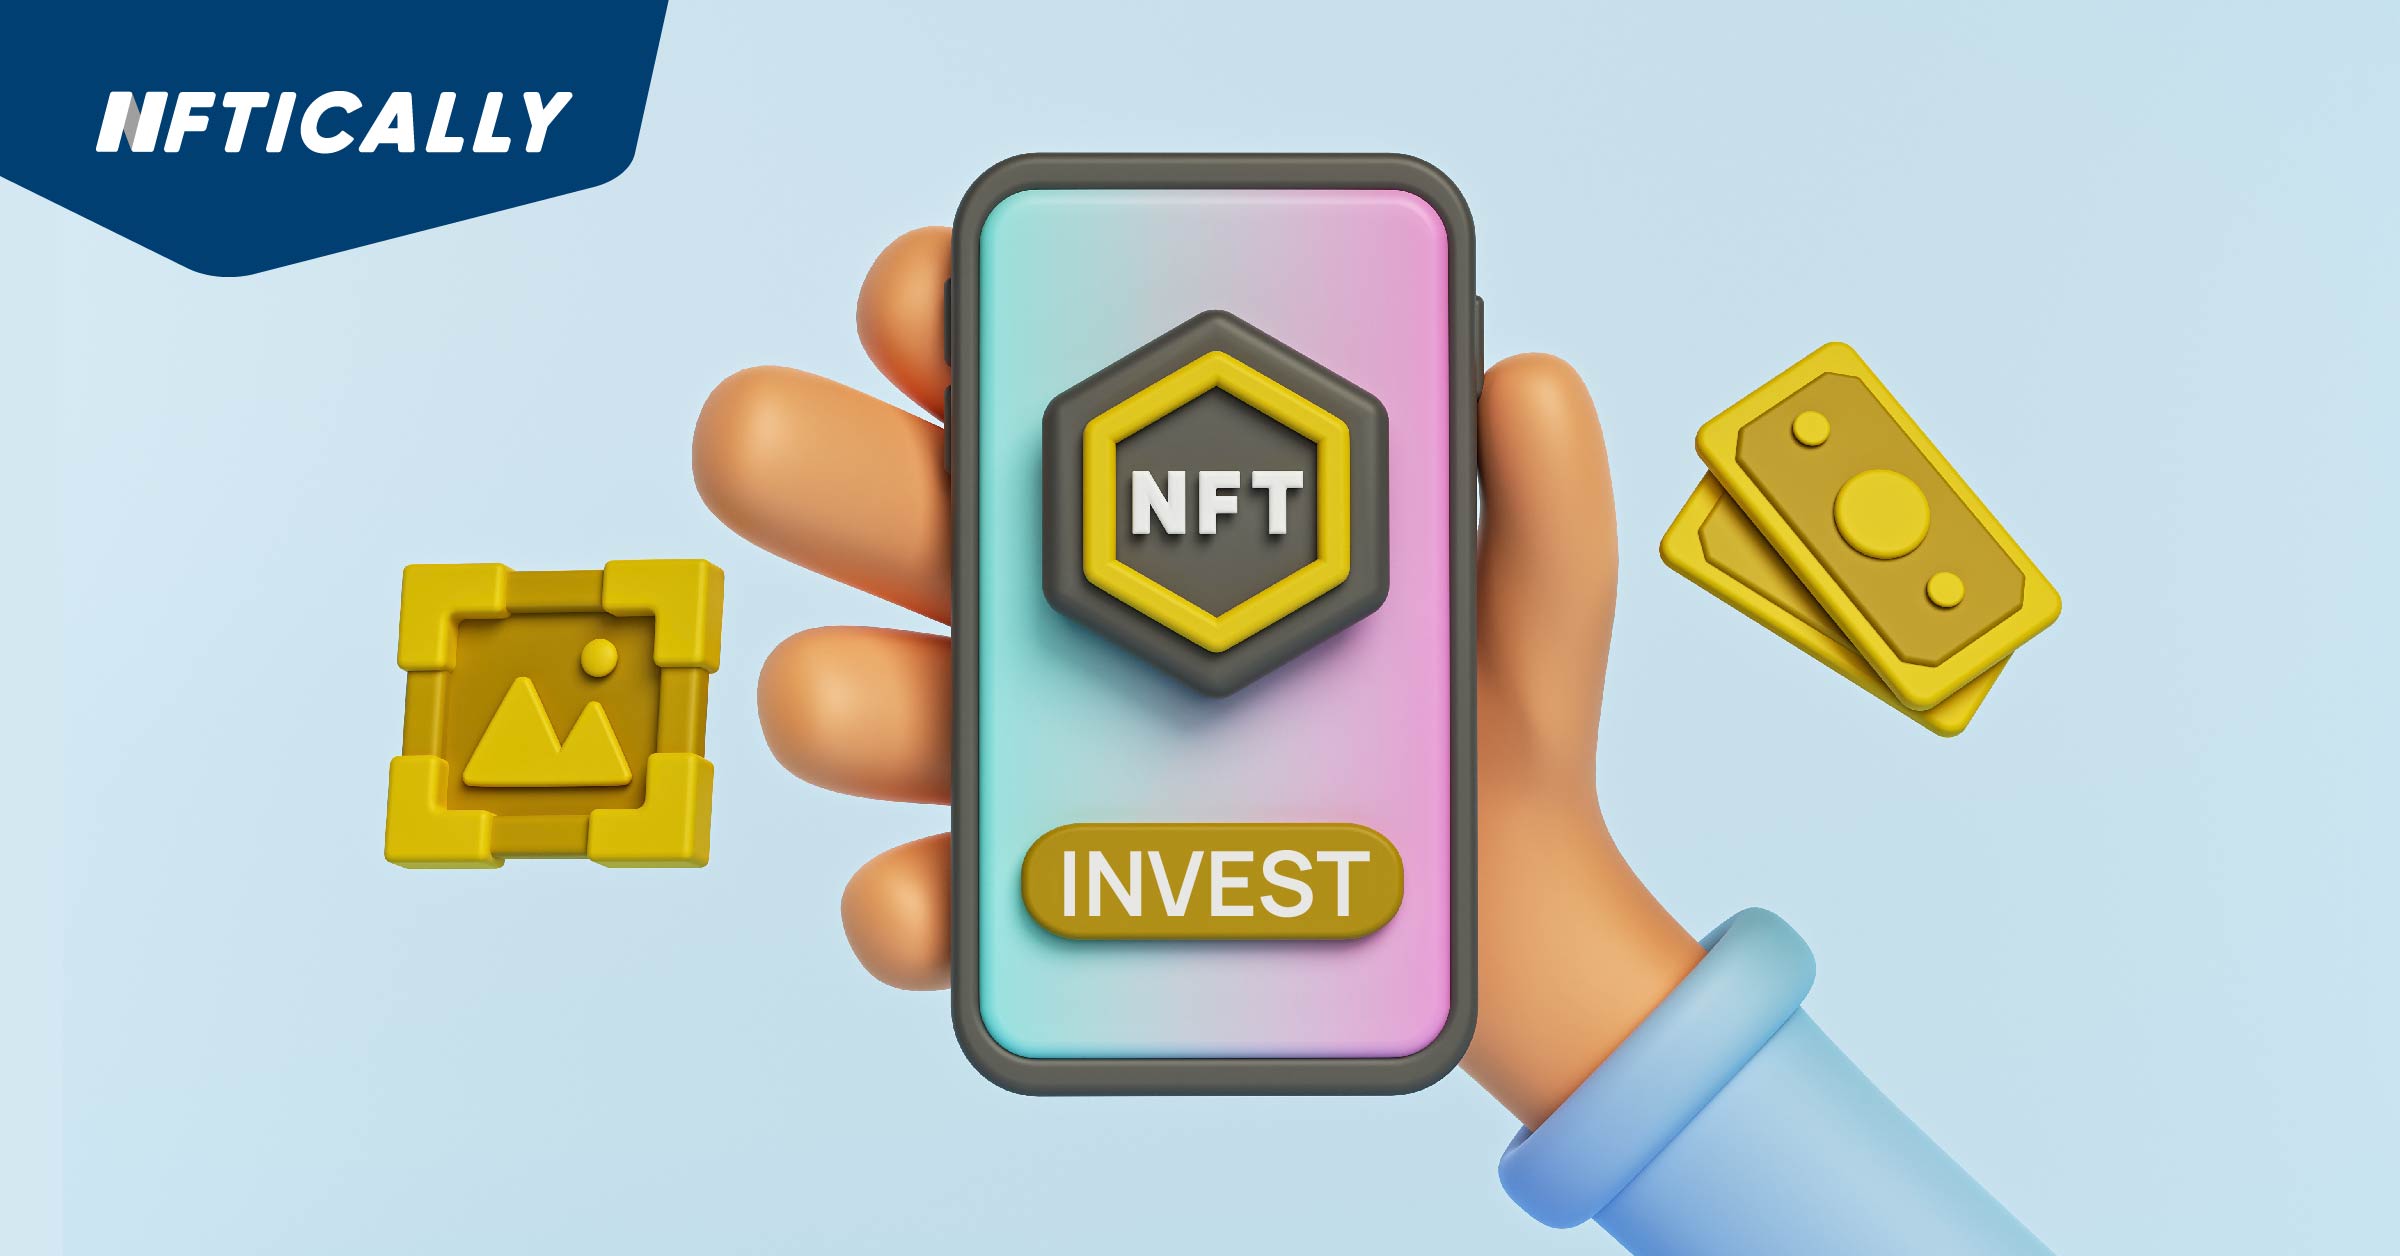 What are the best NFTs to invest in 2022?